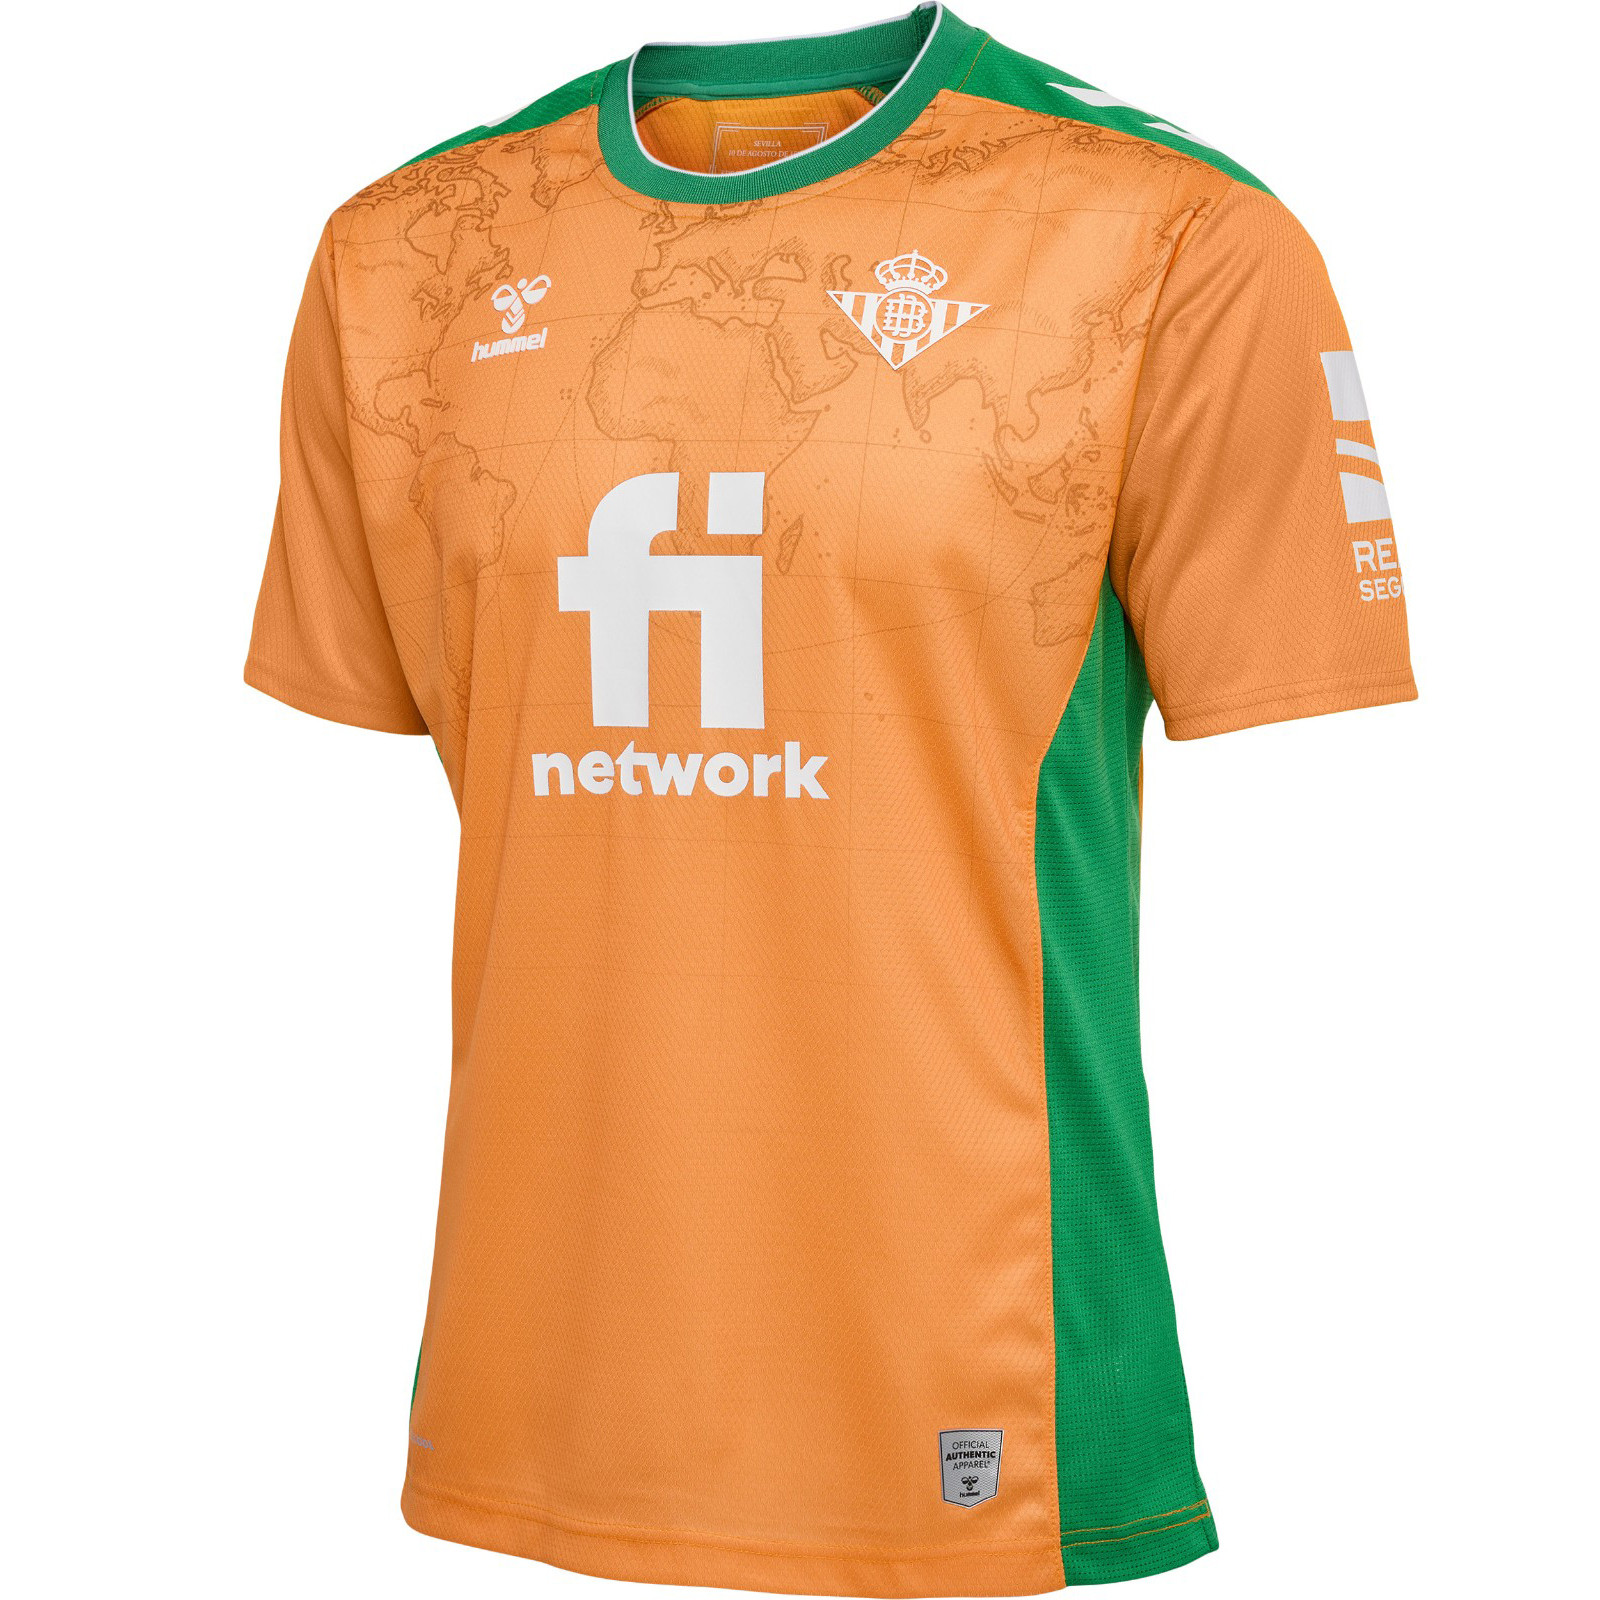 peamu.fr - Maillot foot Real Betis Third Jaune 2022-2023 Fiable I127